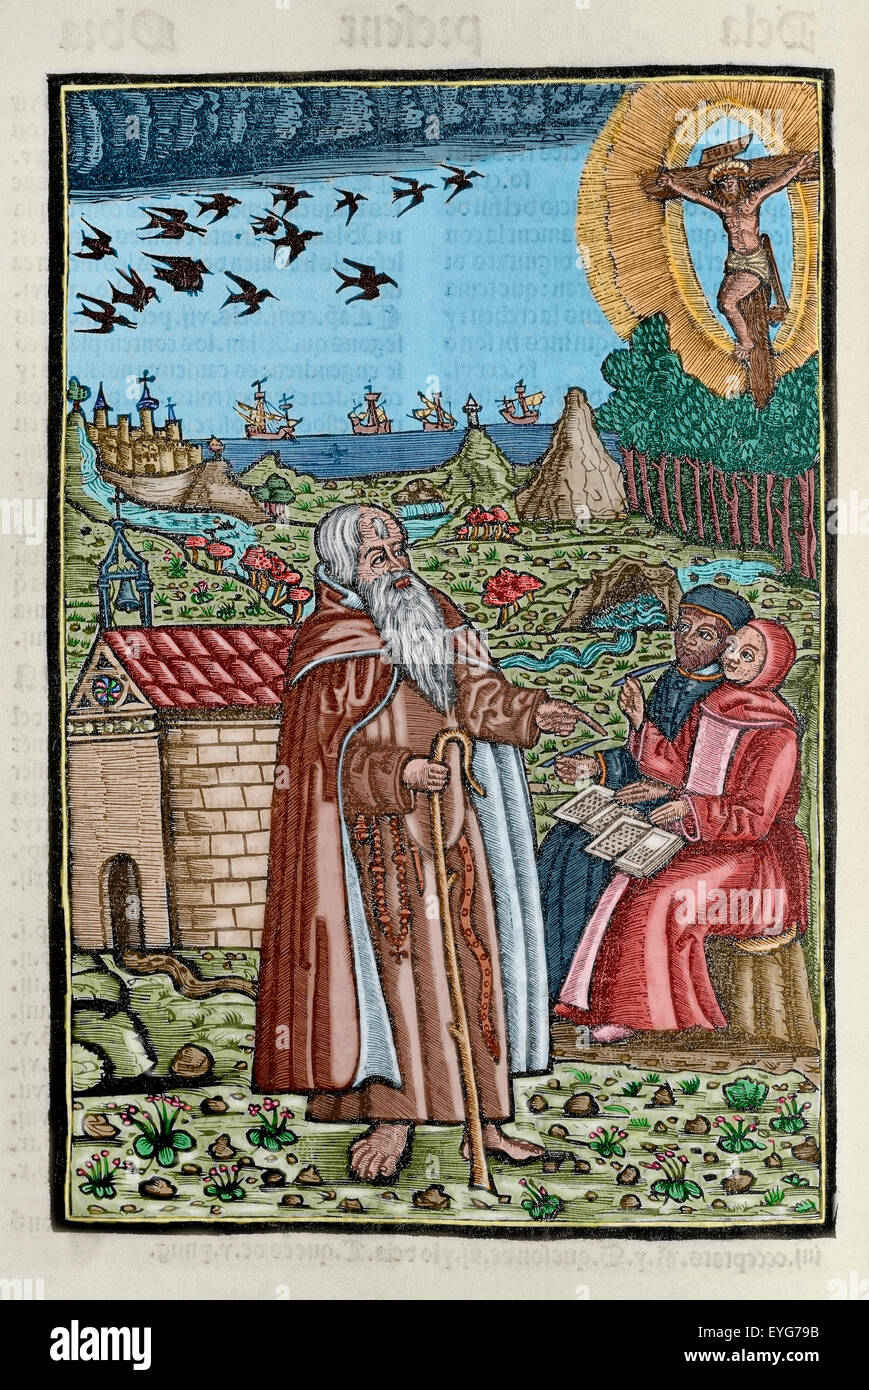 Ramon Llull (1235-1316). Spanish writer and philosopher. Blanquerna, ca. 1293. Engraving depicting Ramon Llull preaching or talking to two people or disciples. Colored. Stock Photo